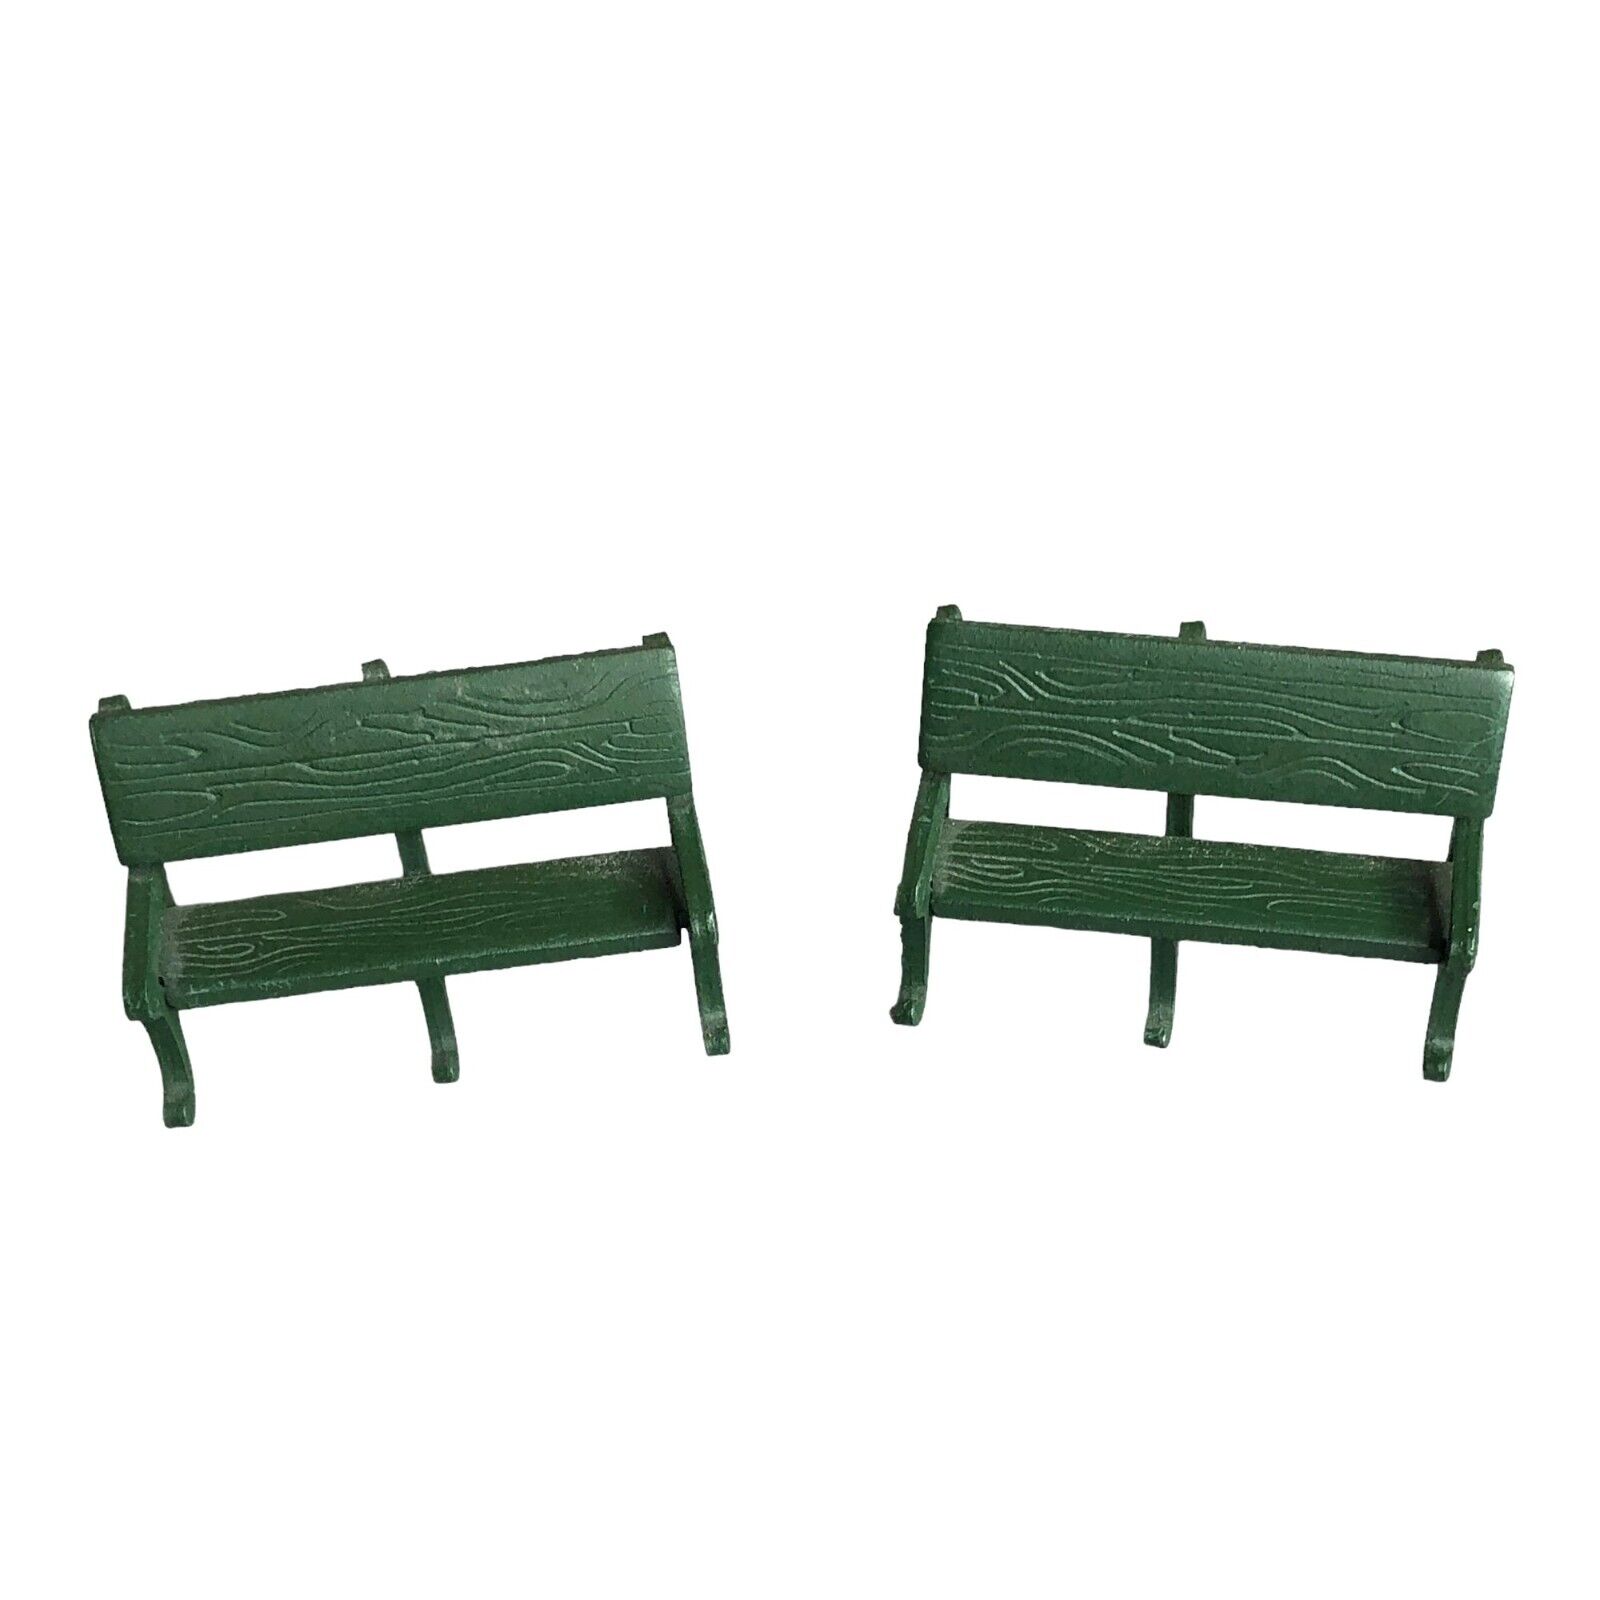 Department Dept 56 Snow Village Accessory Cast Iron Green Park Benches Towns Sq